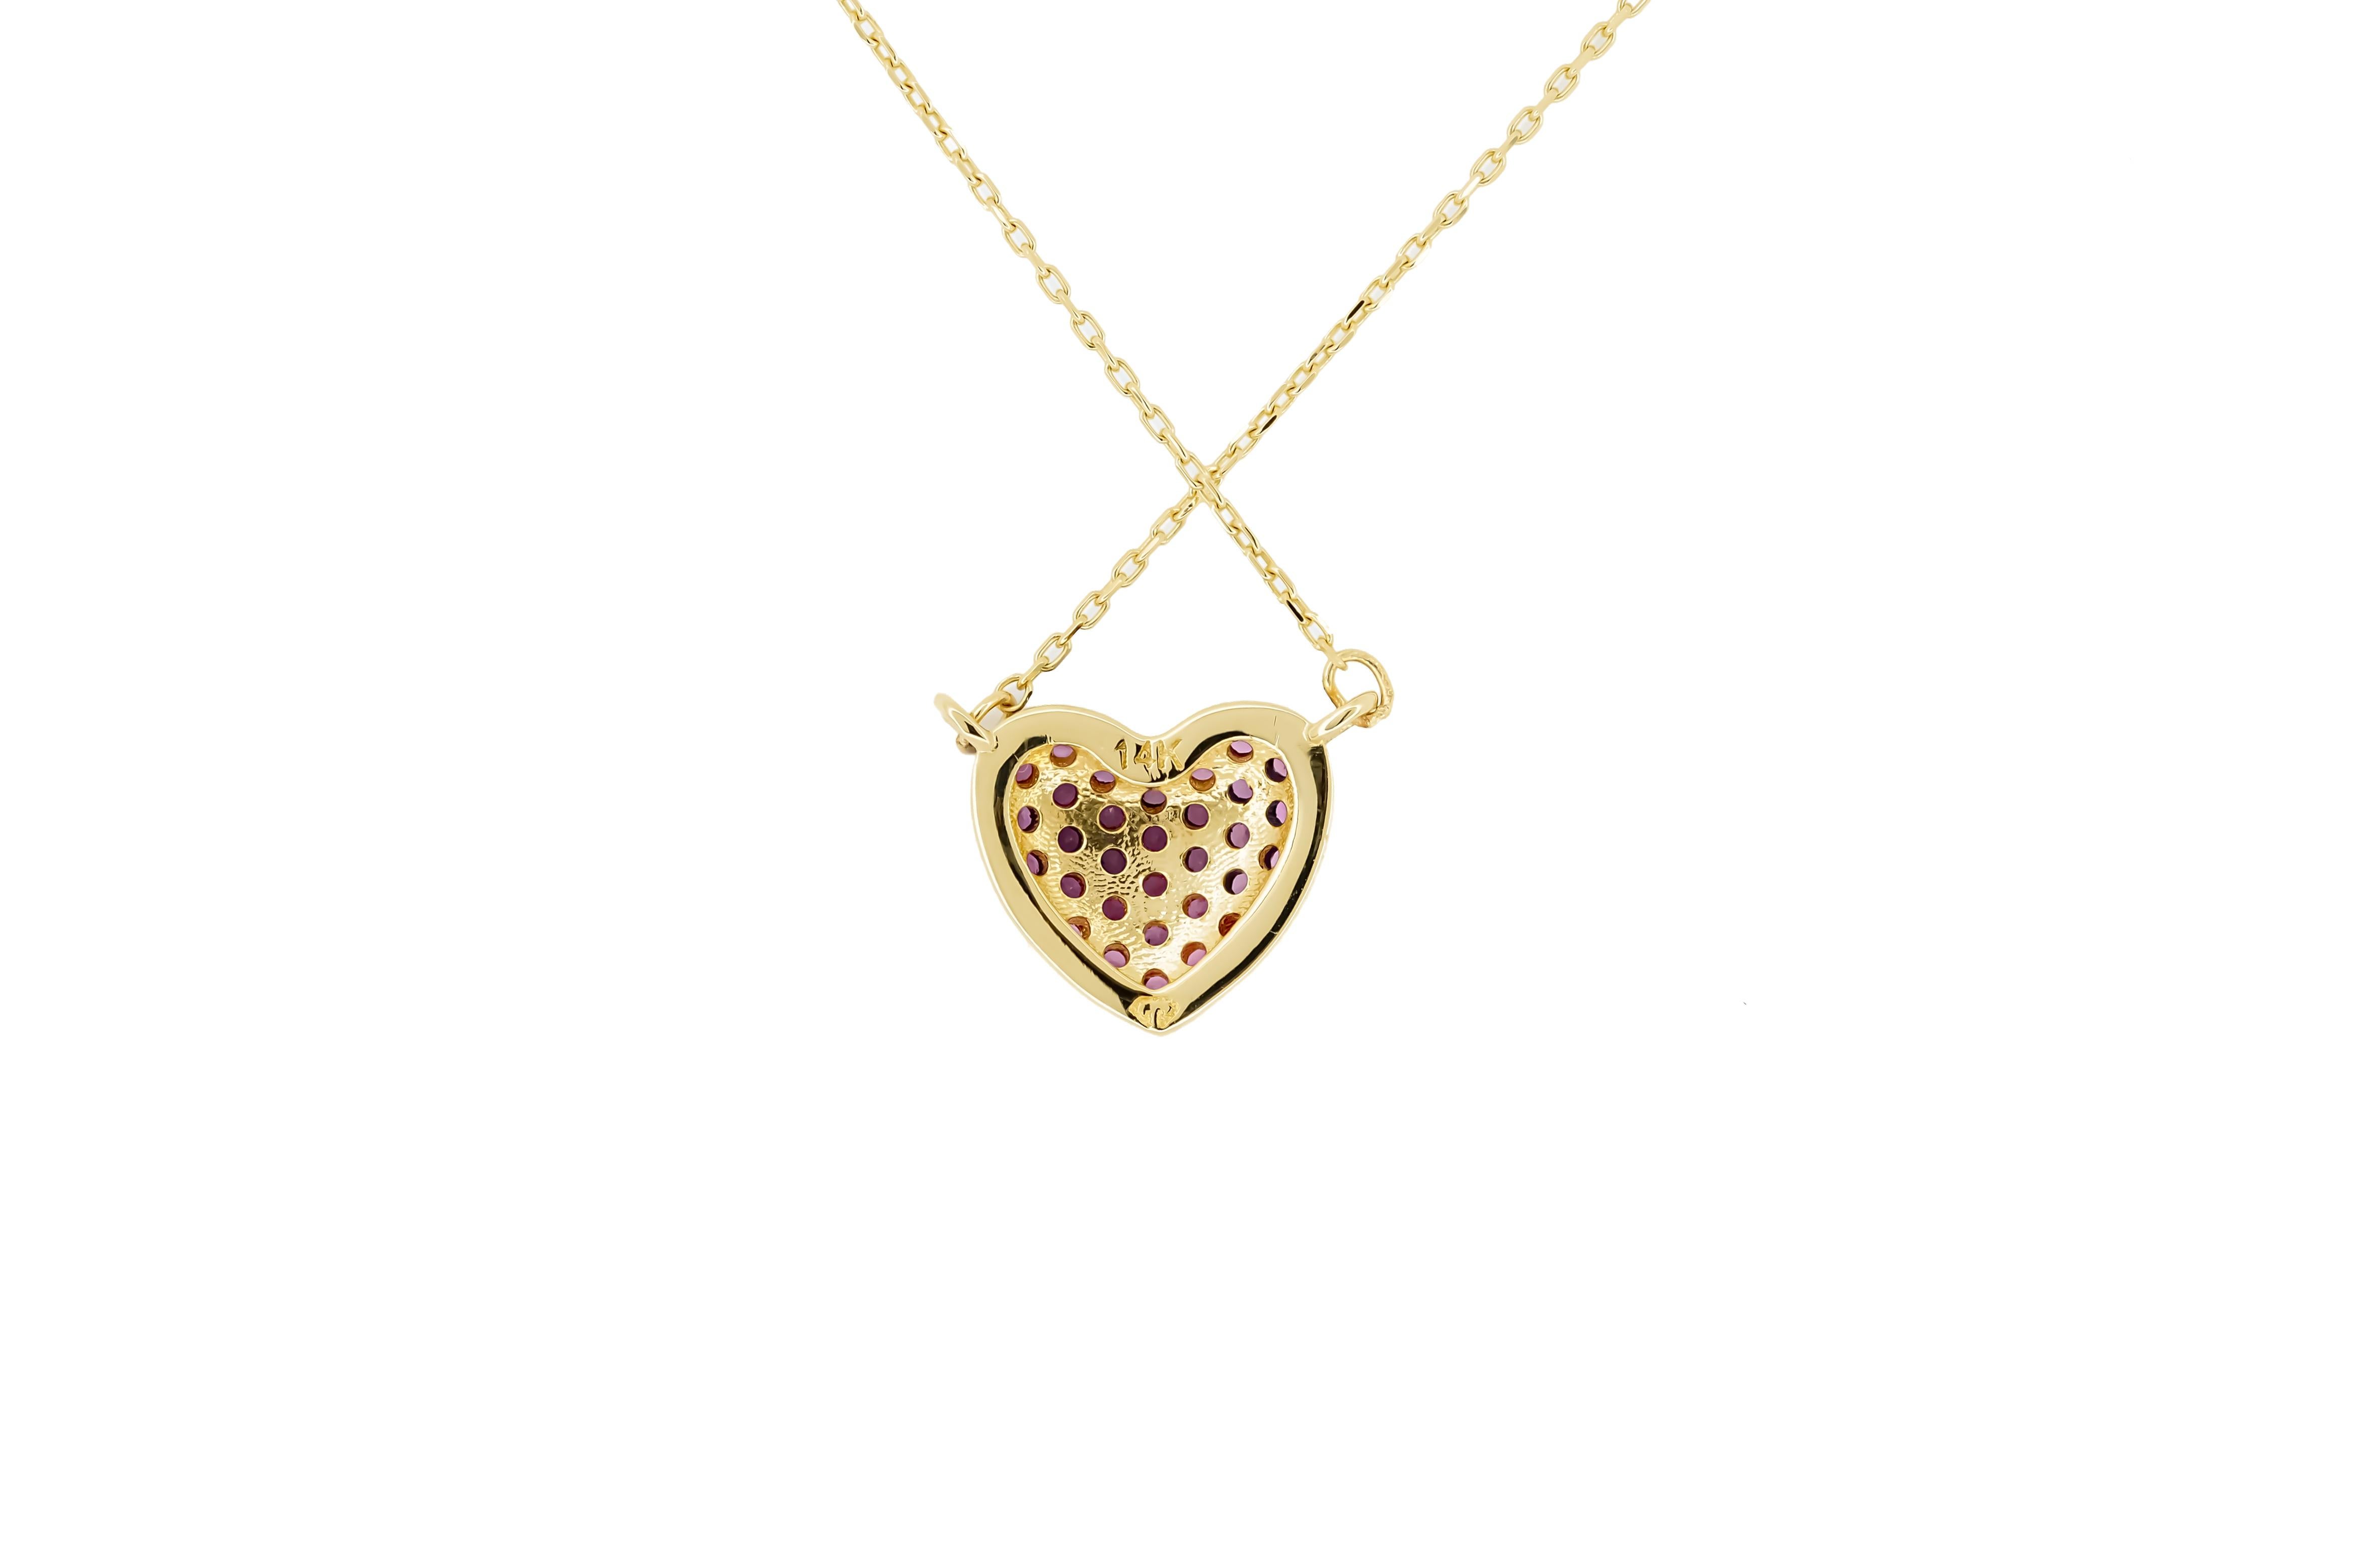 Modern 14k Solid Gold Heart Pendant Necklace, Heart Necklace for Women